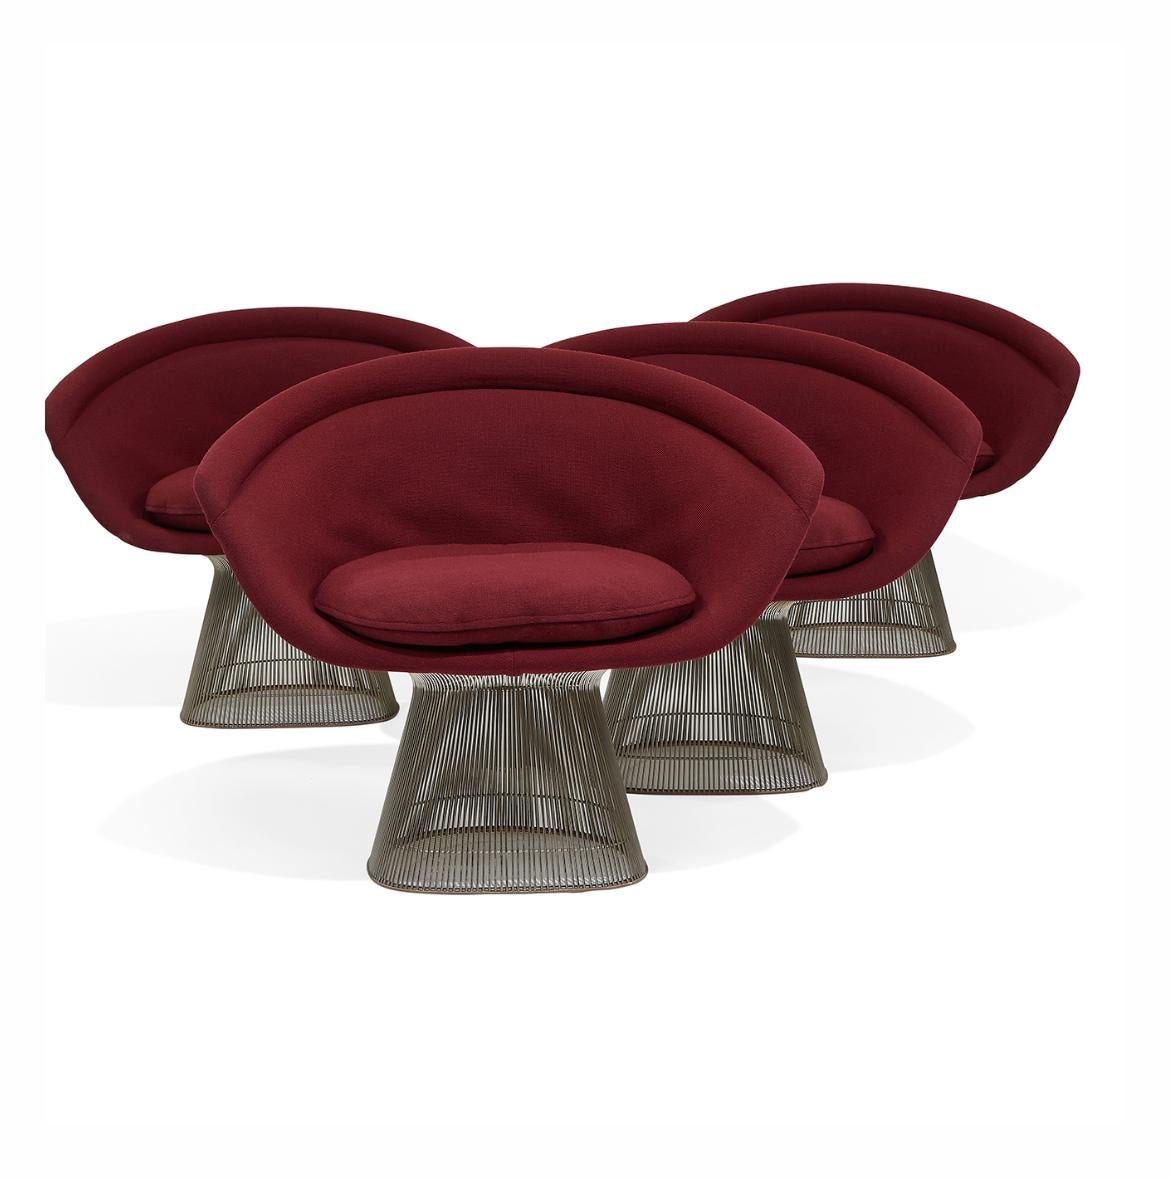 Warren Platner (1919-2006) for Knoll International, Platner Collection lounge chairs, set of four, New York, New York, 1979. Chrome-plated steel, original maroon upholstery, each with Knoll sticker and upholstery label.
 